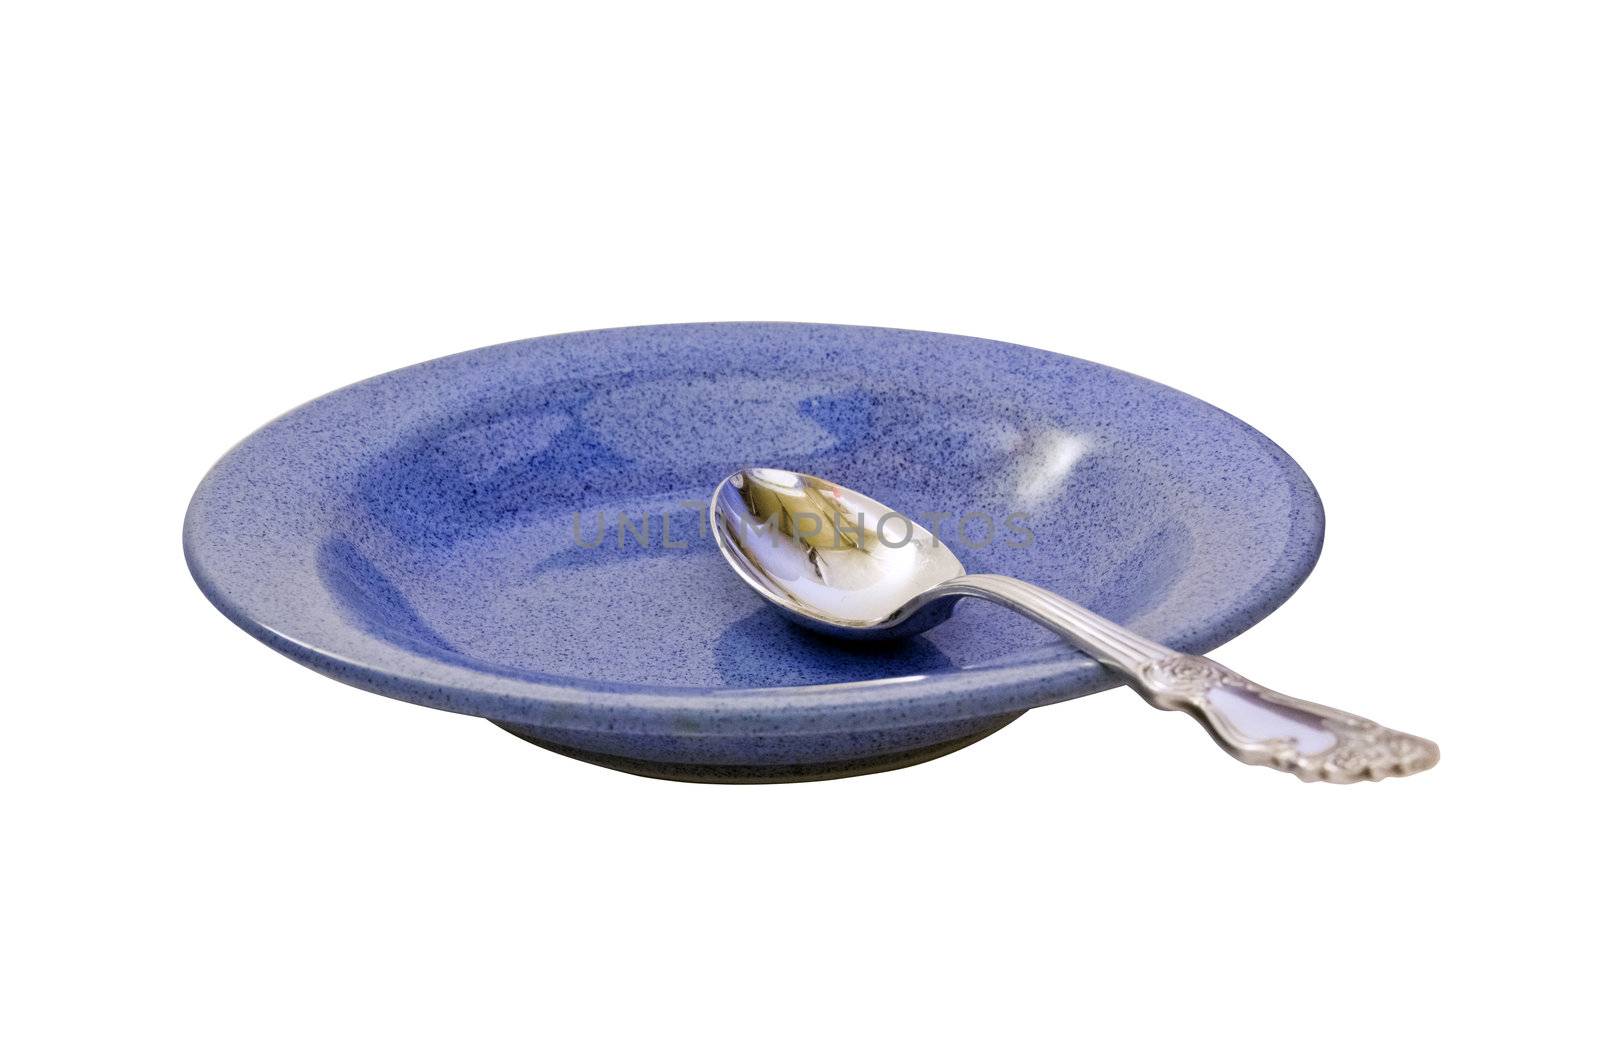 contour, silhouette, profile spoon and blue plate